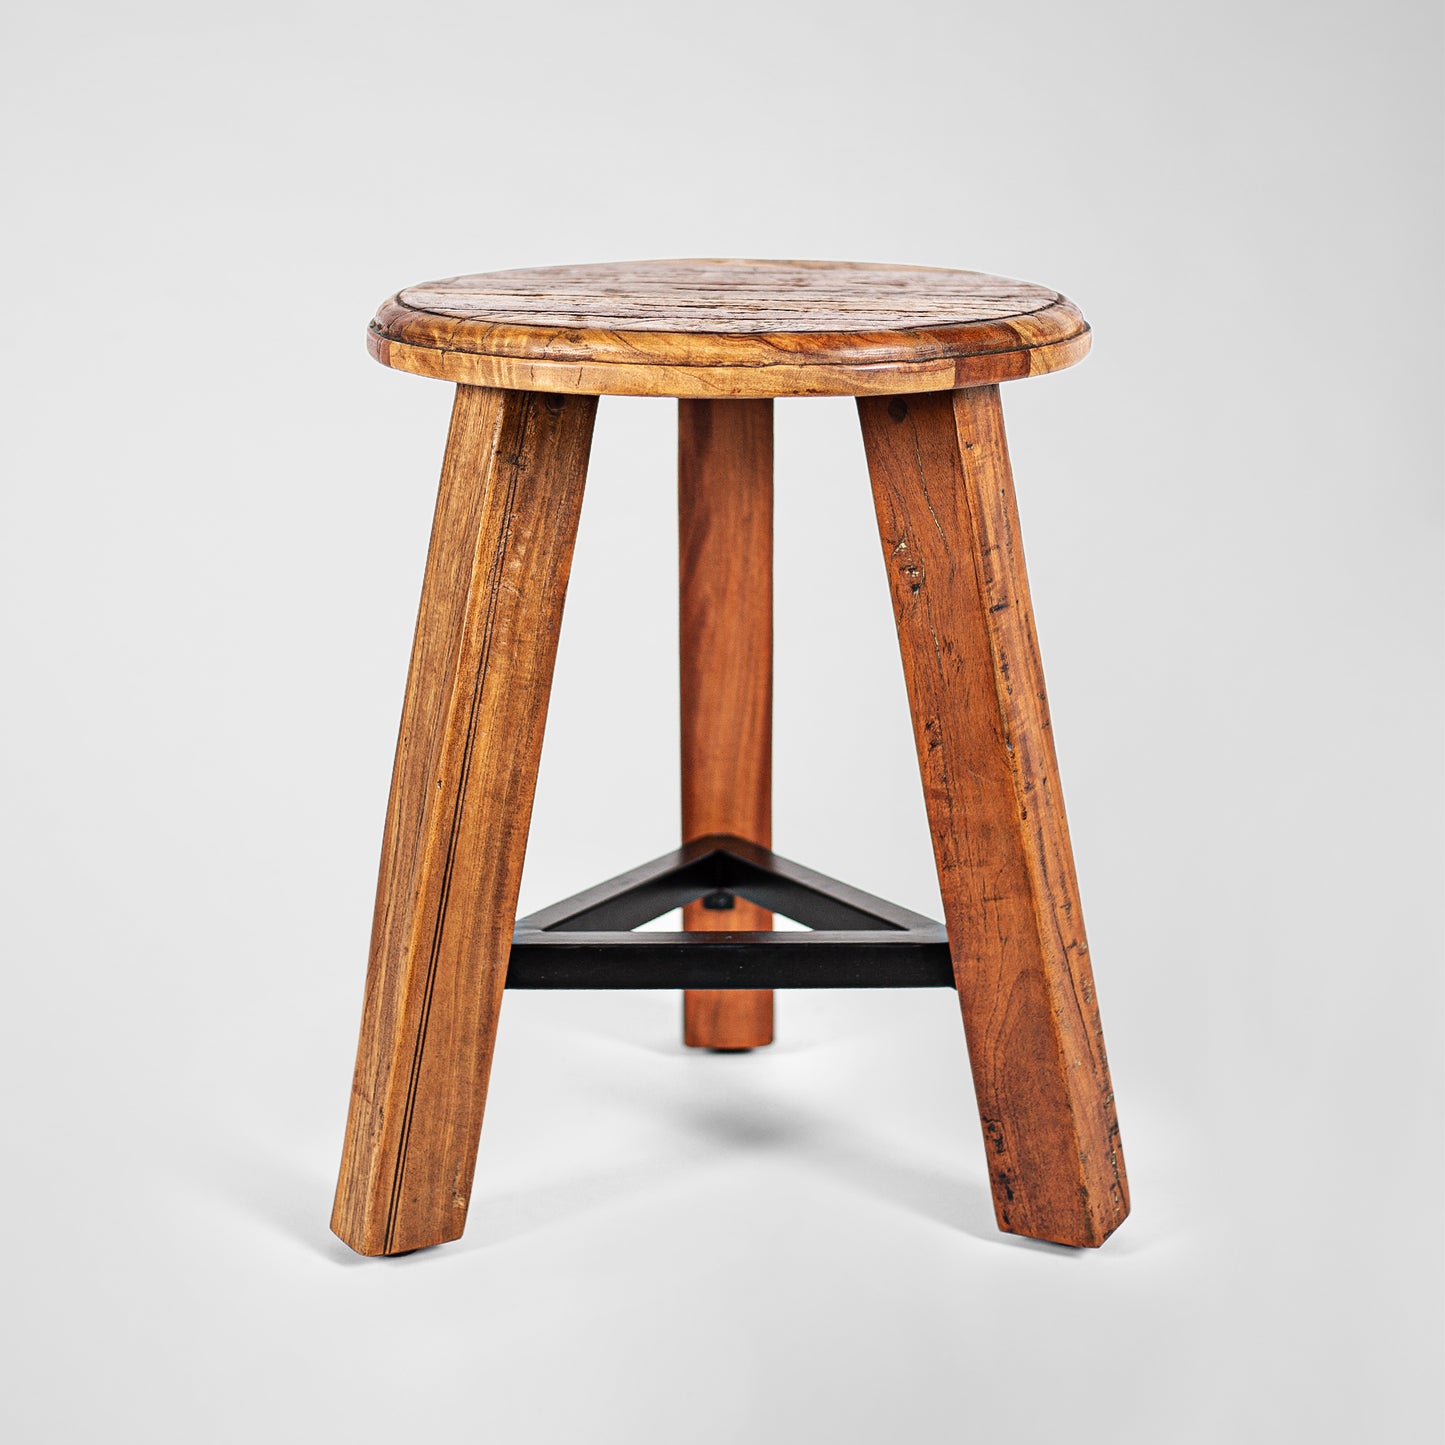 Babawood – Handmade country house design stool made of wood